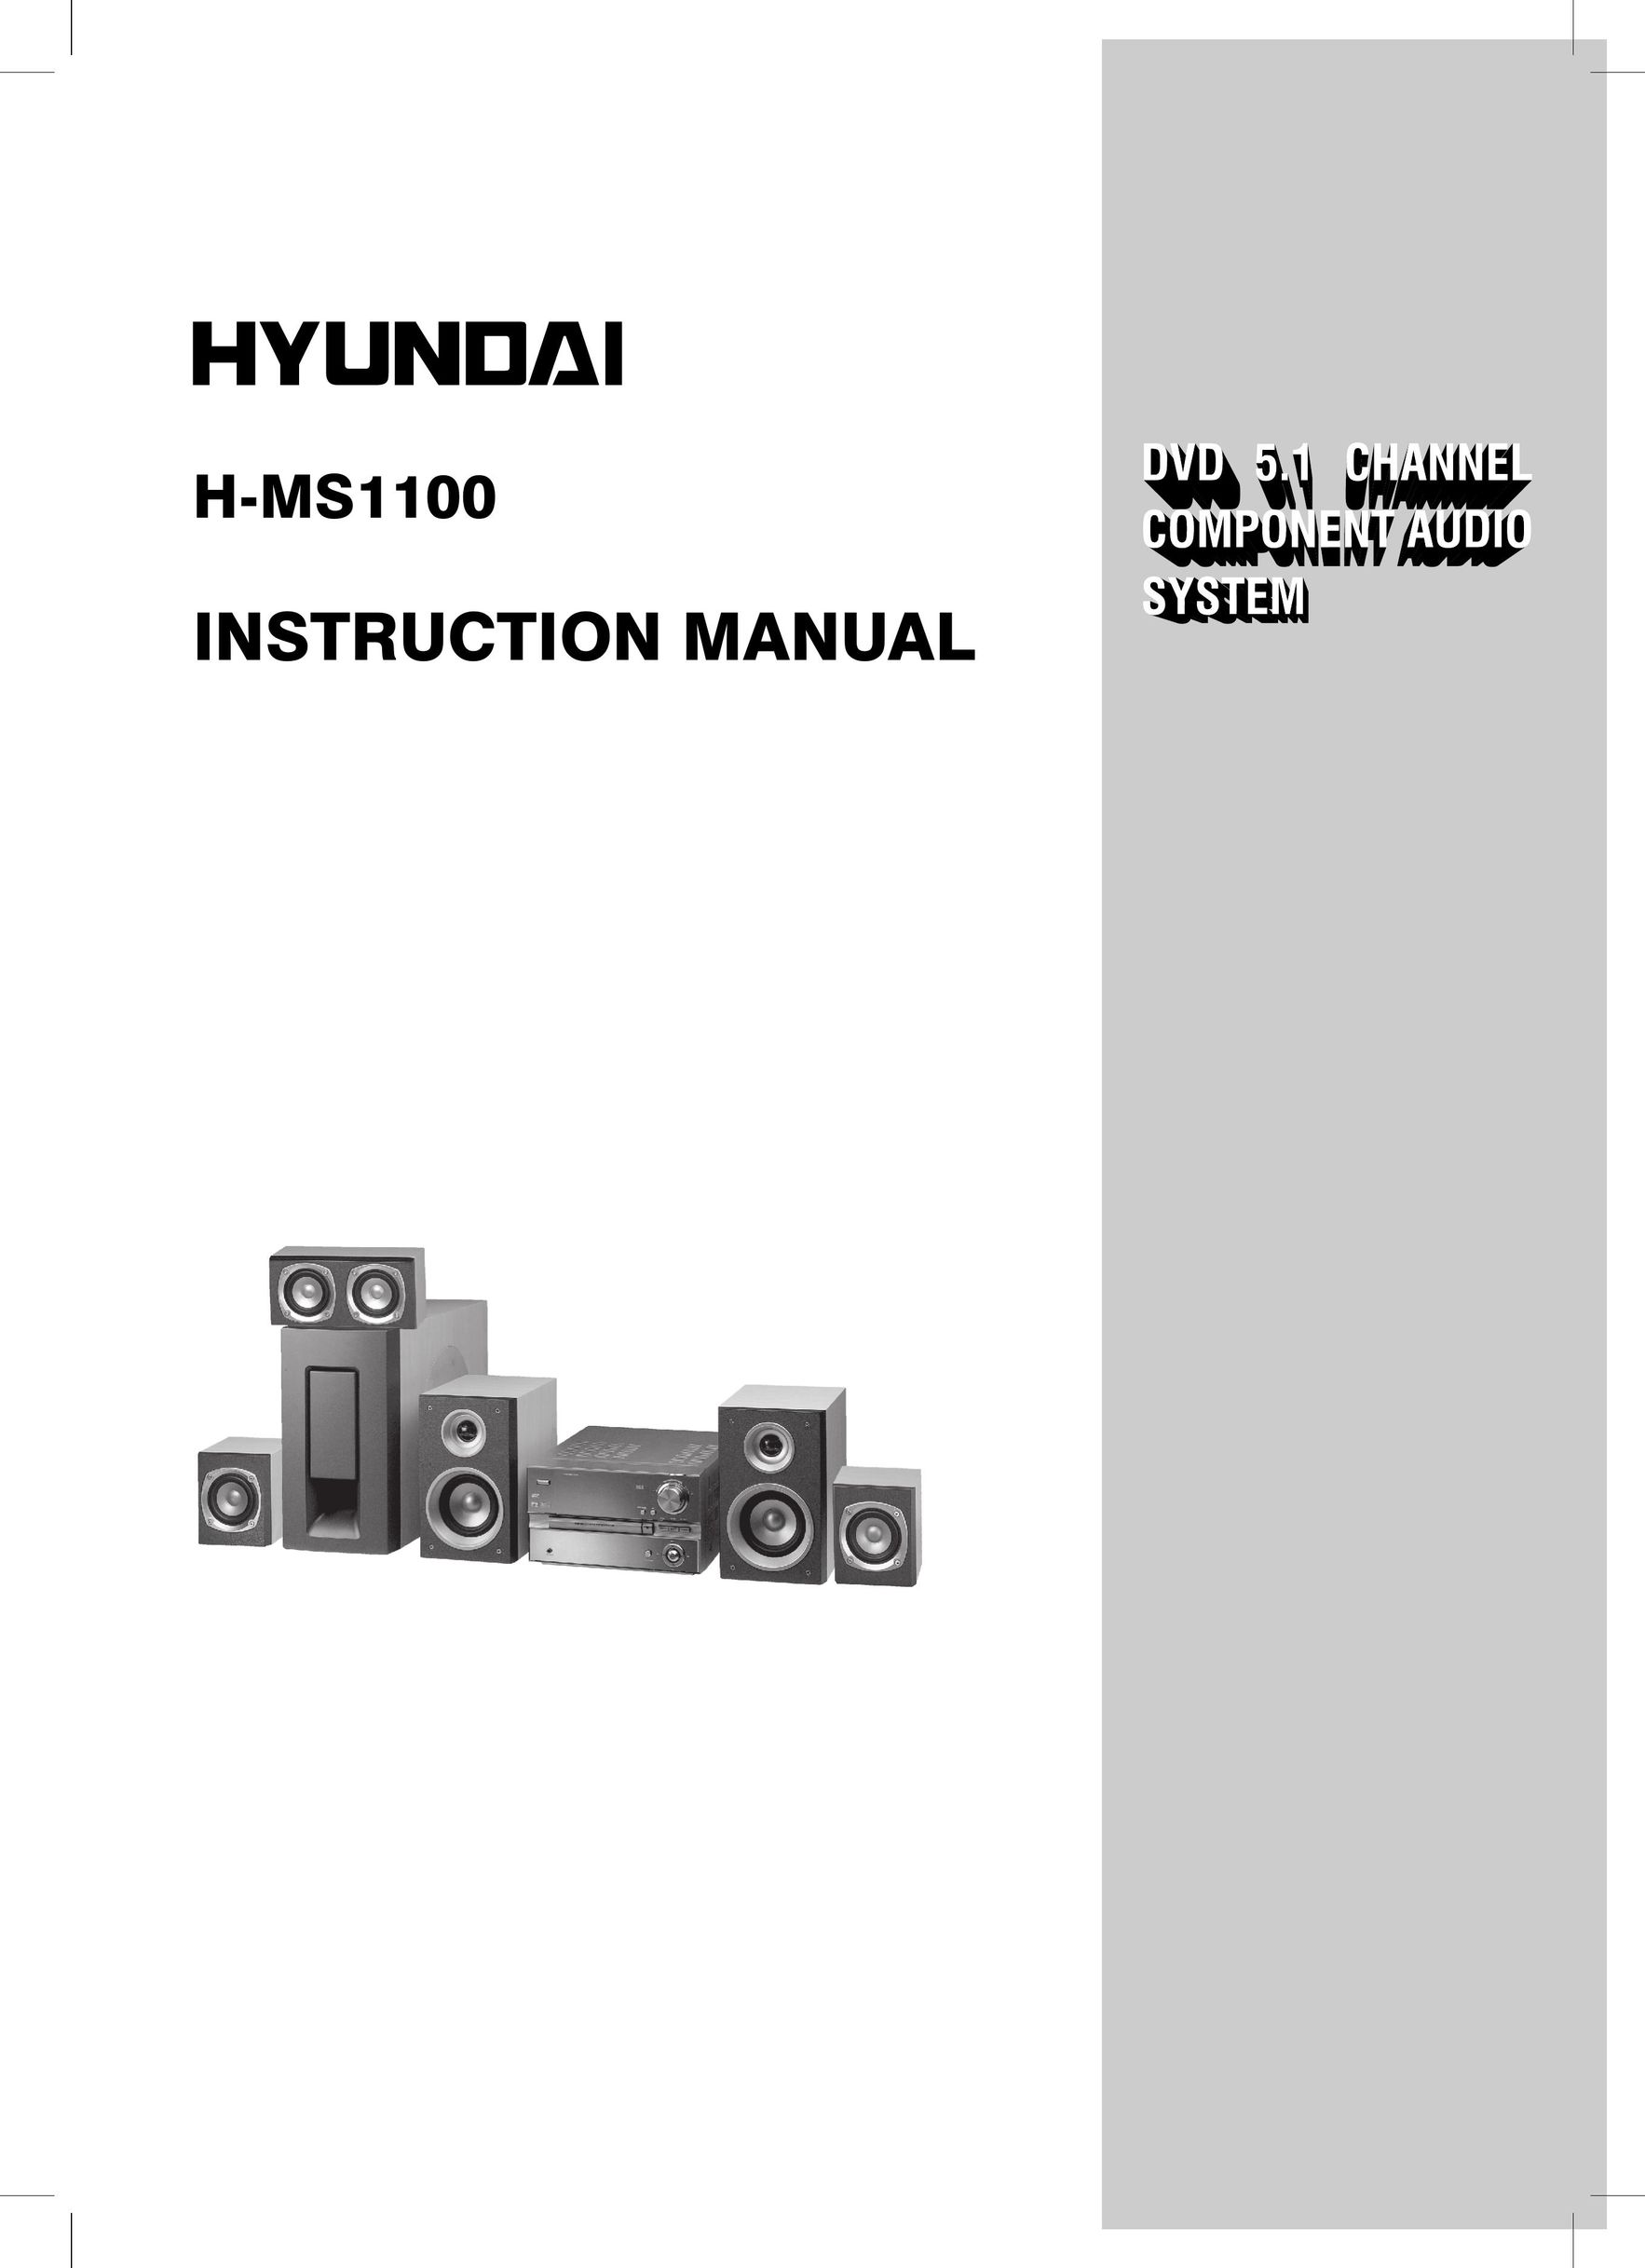 Hyundai H-MS1100 Home Theater System User Manual